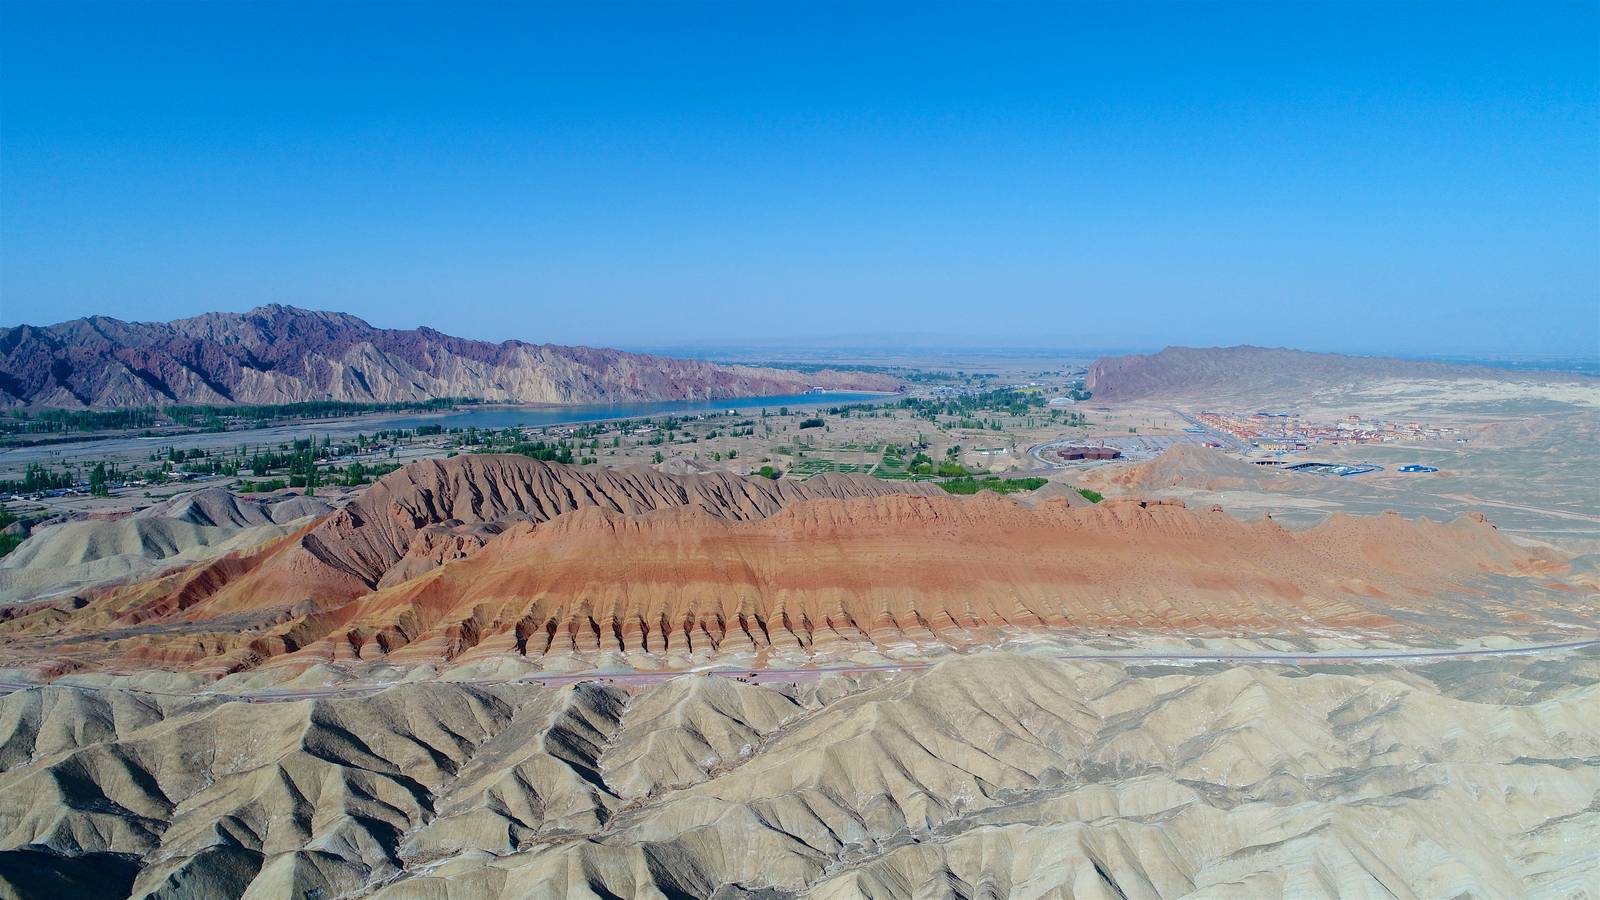 Aerial view of colorful rainbow mountains, Zhangye National Geopark, Gansu Province, China